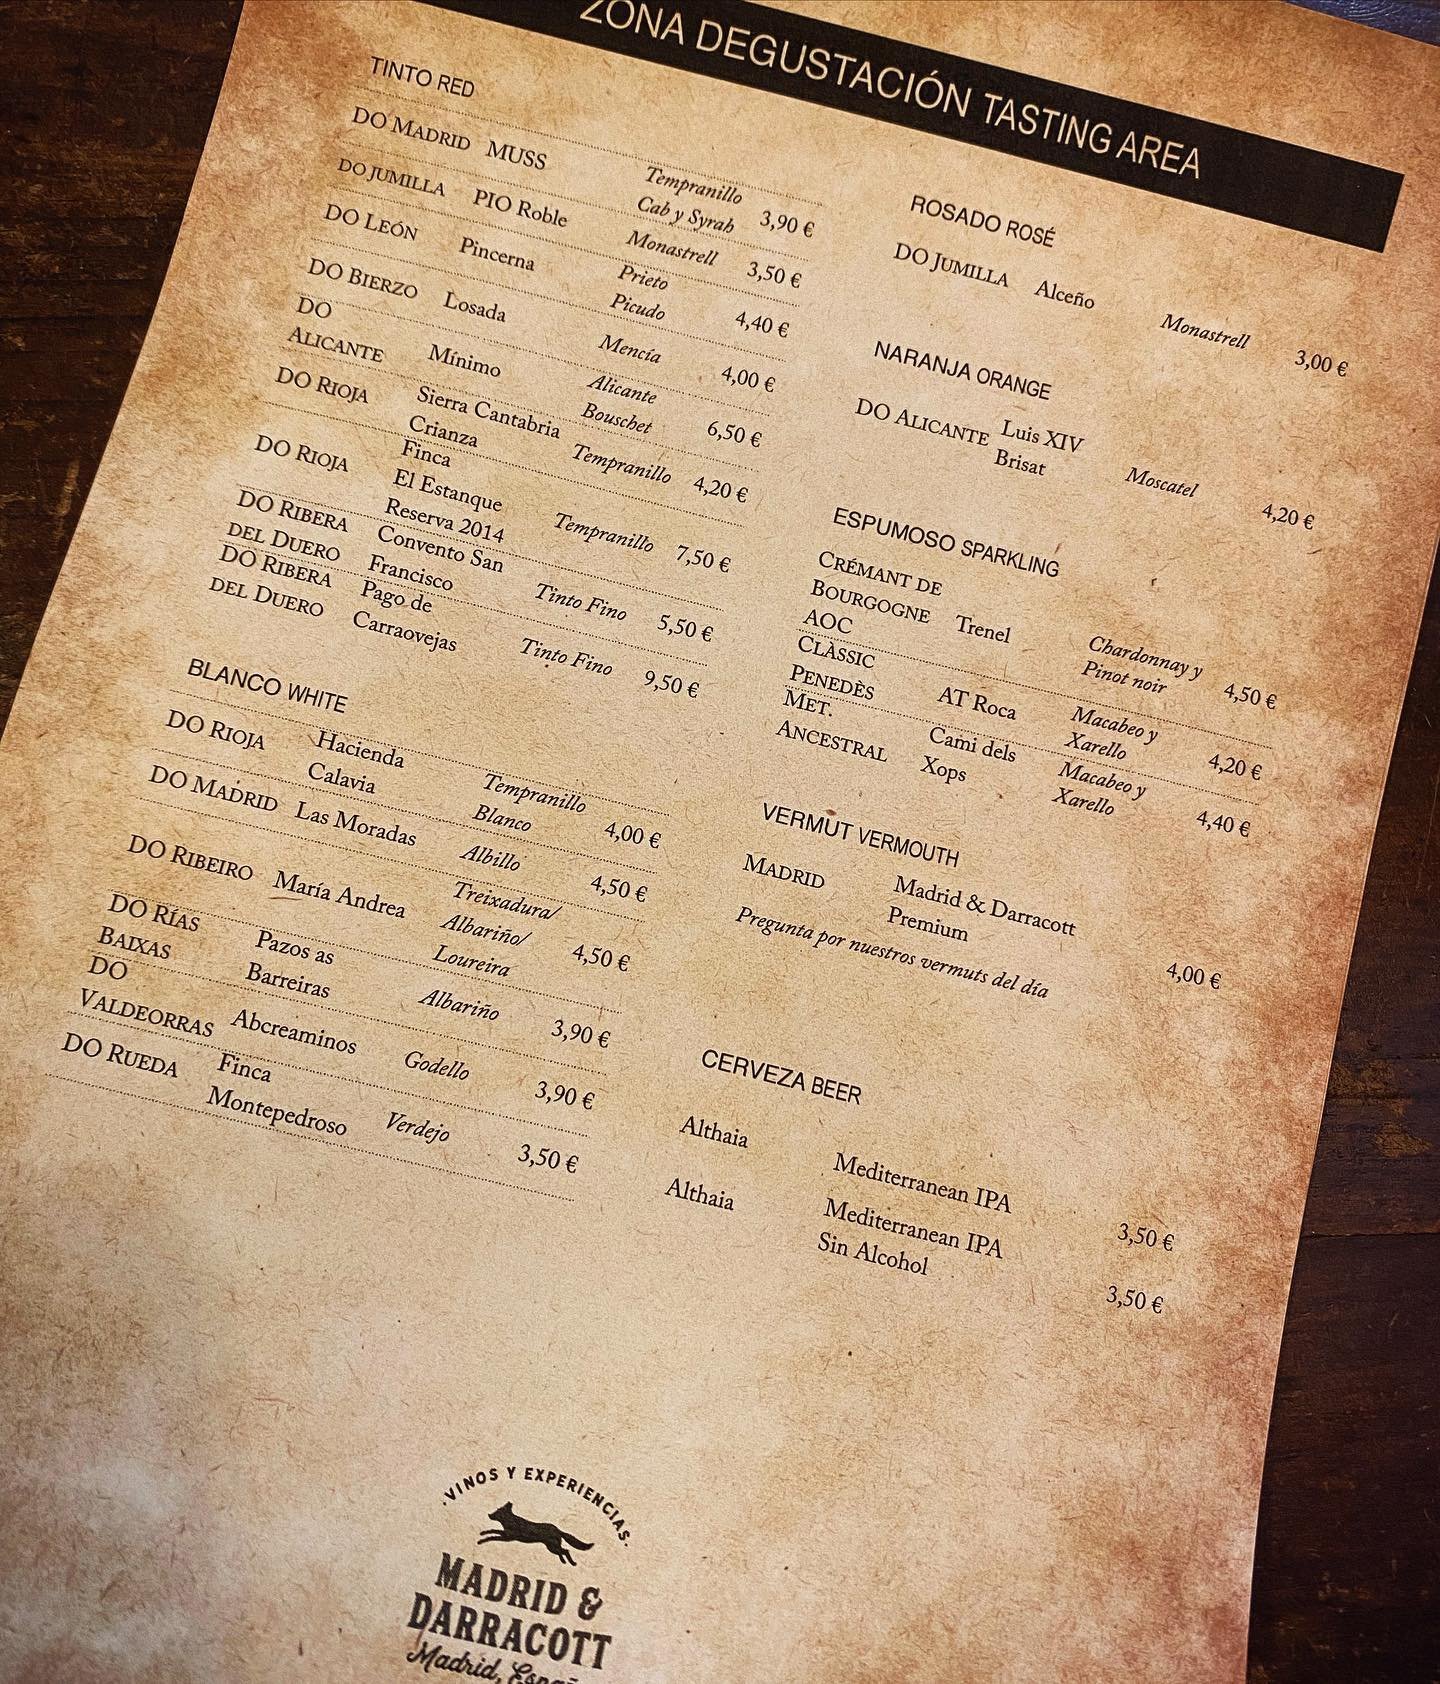 Our exciting May wine list is ready for you! Everything from classic Riojas and Galician white wines to rarities like Tempranillo Blanco and Alicante Bouschet. So what are you waiting for? // Nuestra emocionante carta de vinos de mayo est&aacute; lis